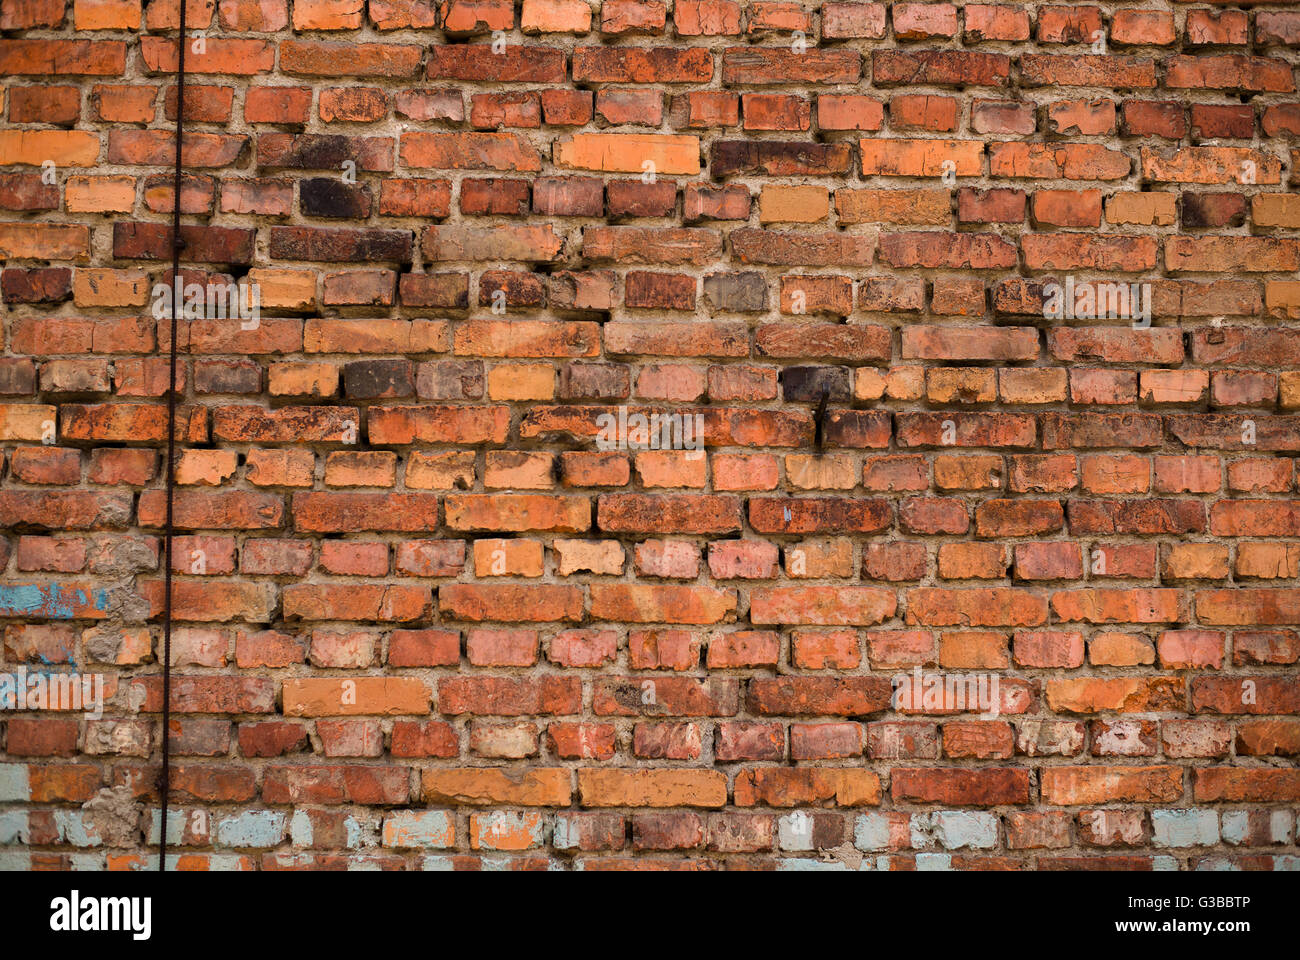 The wall of the old brick house Stock Photo